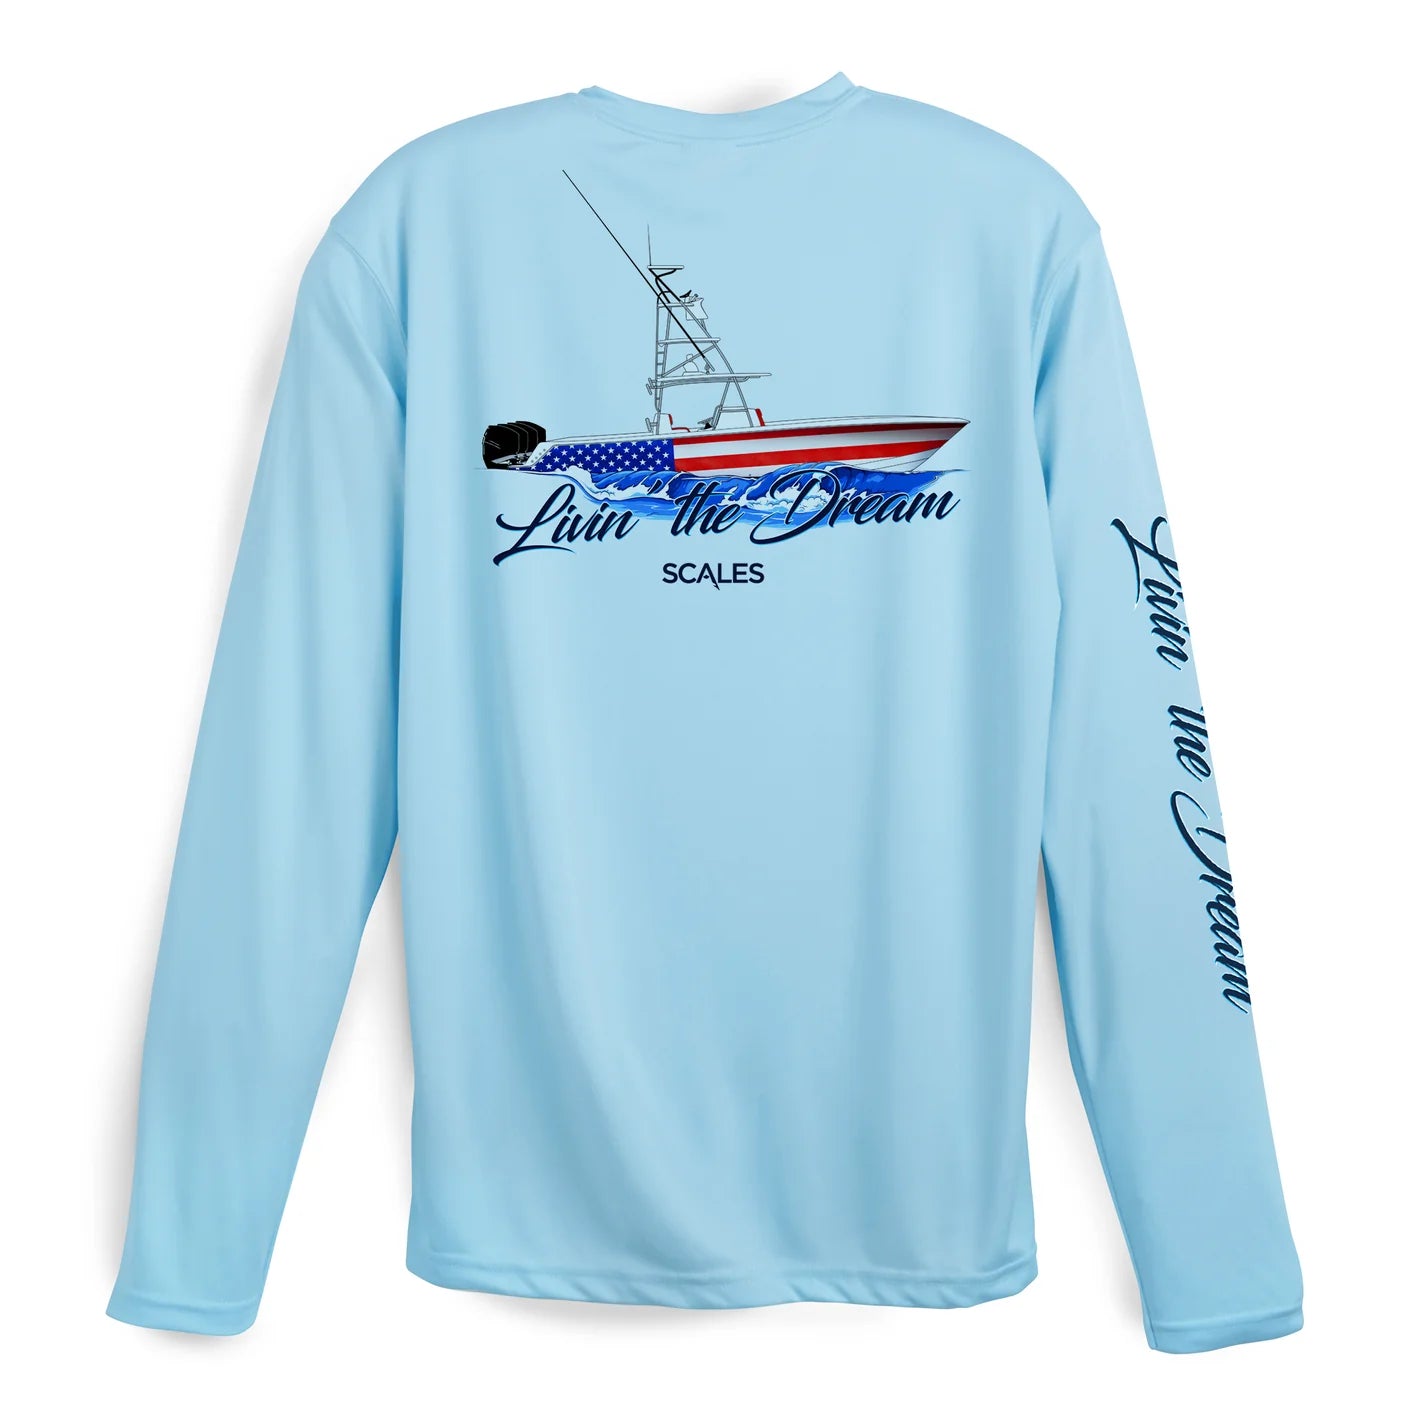 Scales Living The Dream L/S Performance - Light Blue